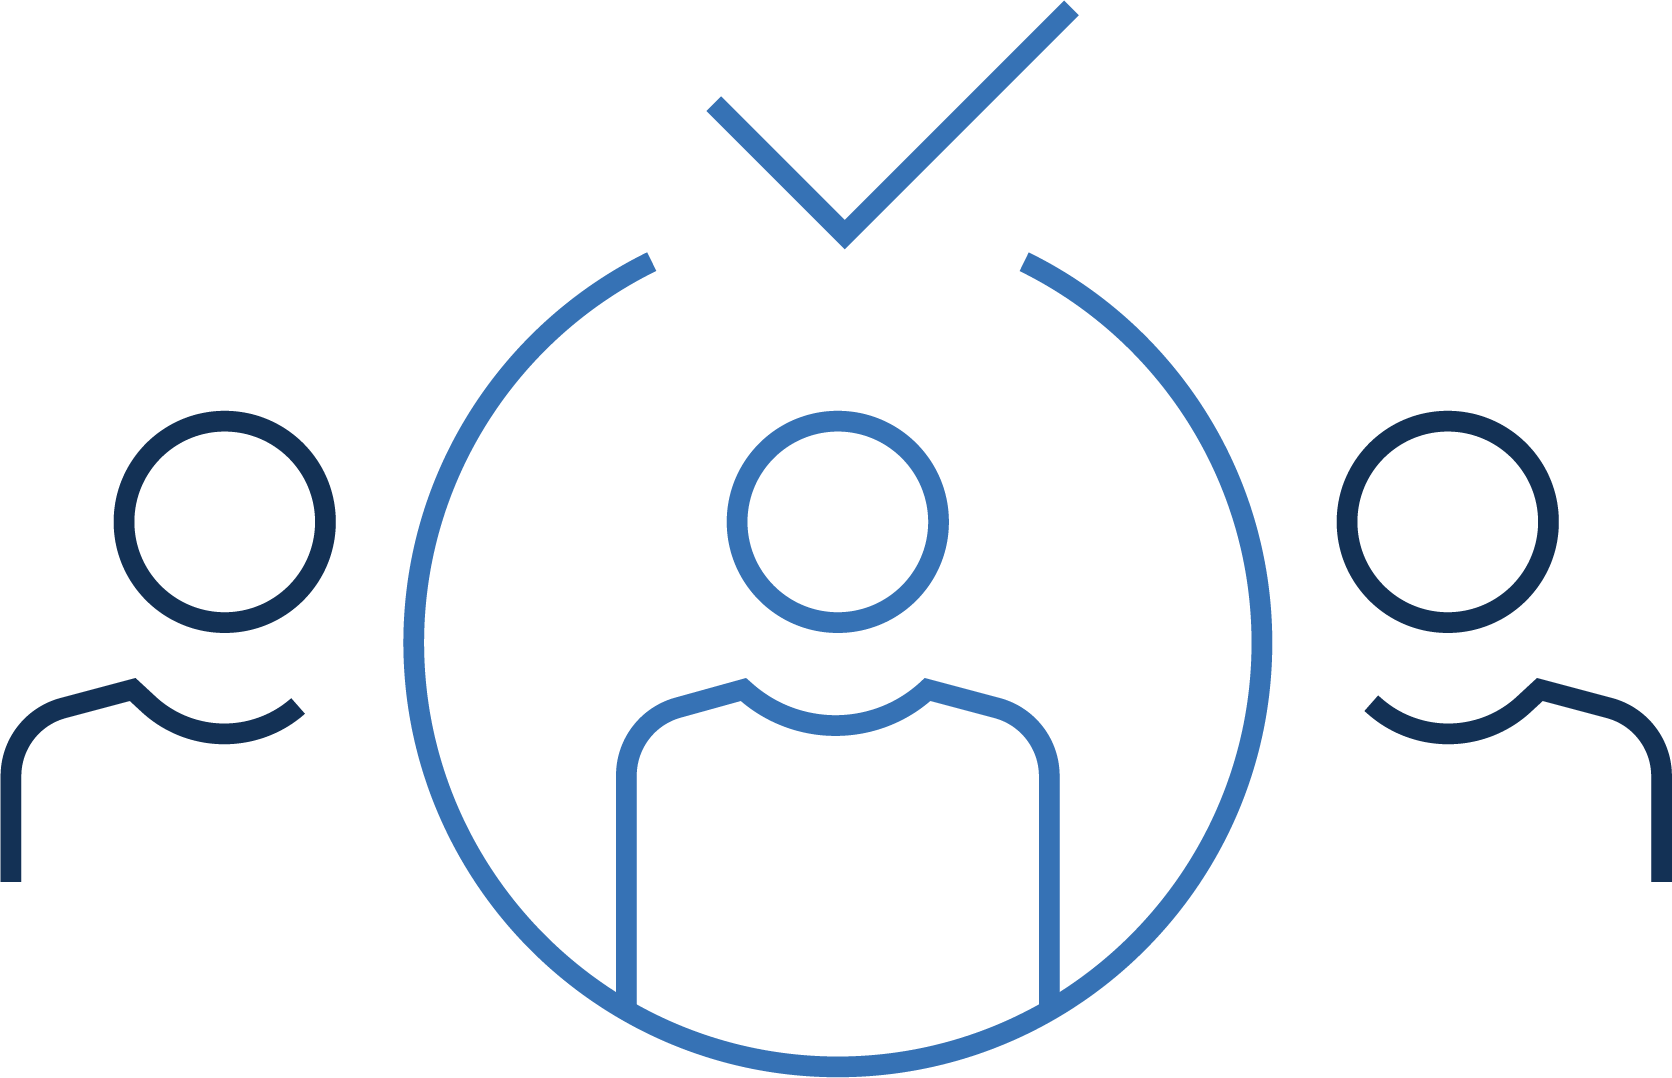 An icon of three people outline in blue, with the center figure circled with a check mark on top, representing the About You section for the Careers page.